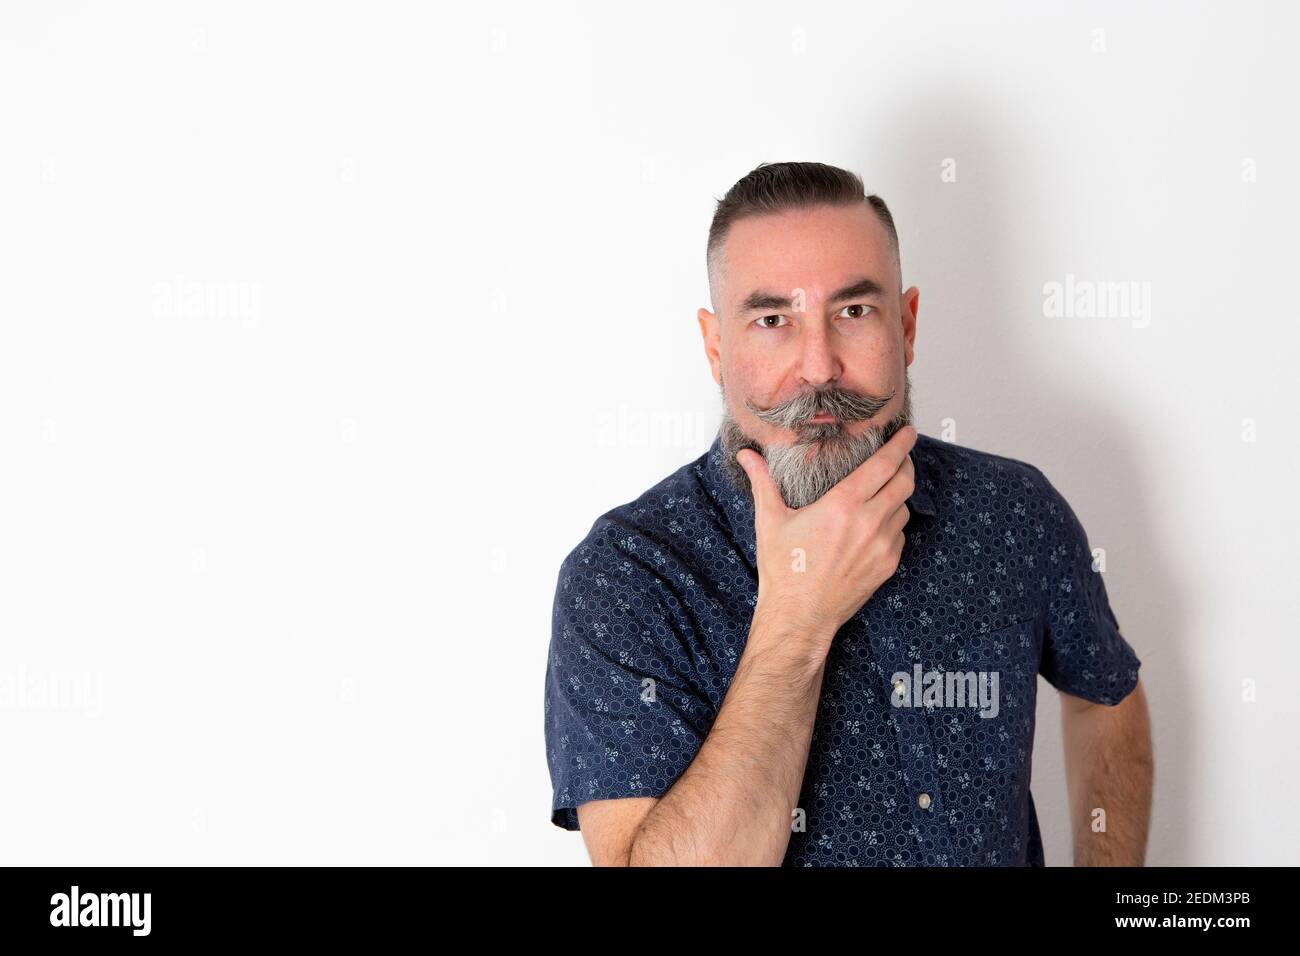 Caucasian hipster with a large gray beard 40-45 years old, on white background looking straight ahead with his hand fixing his beard Stock Photo